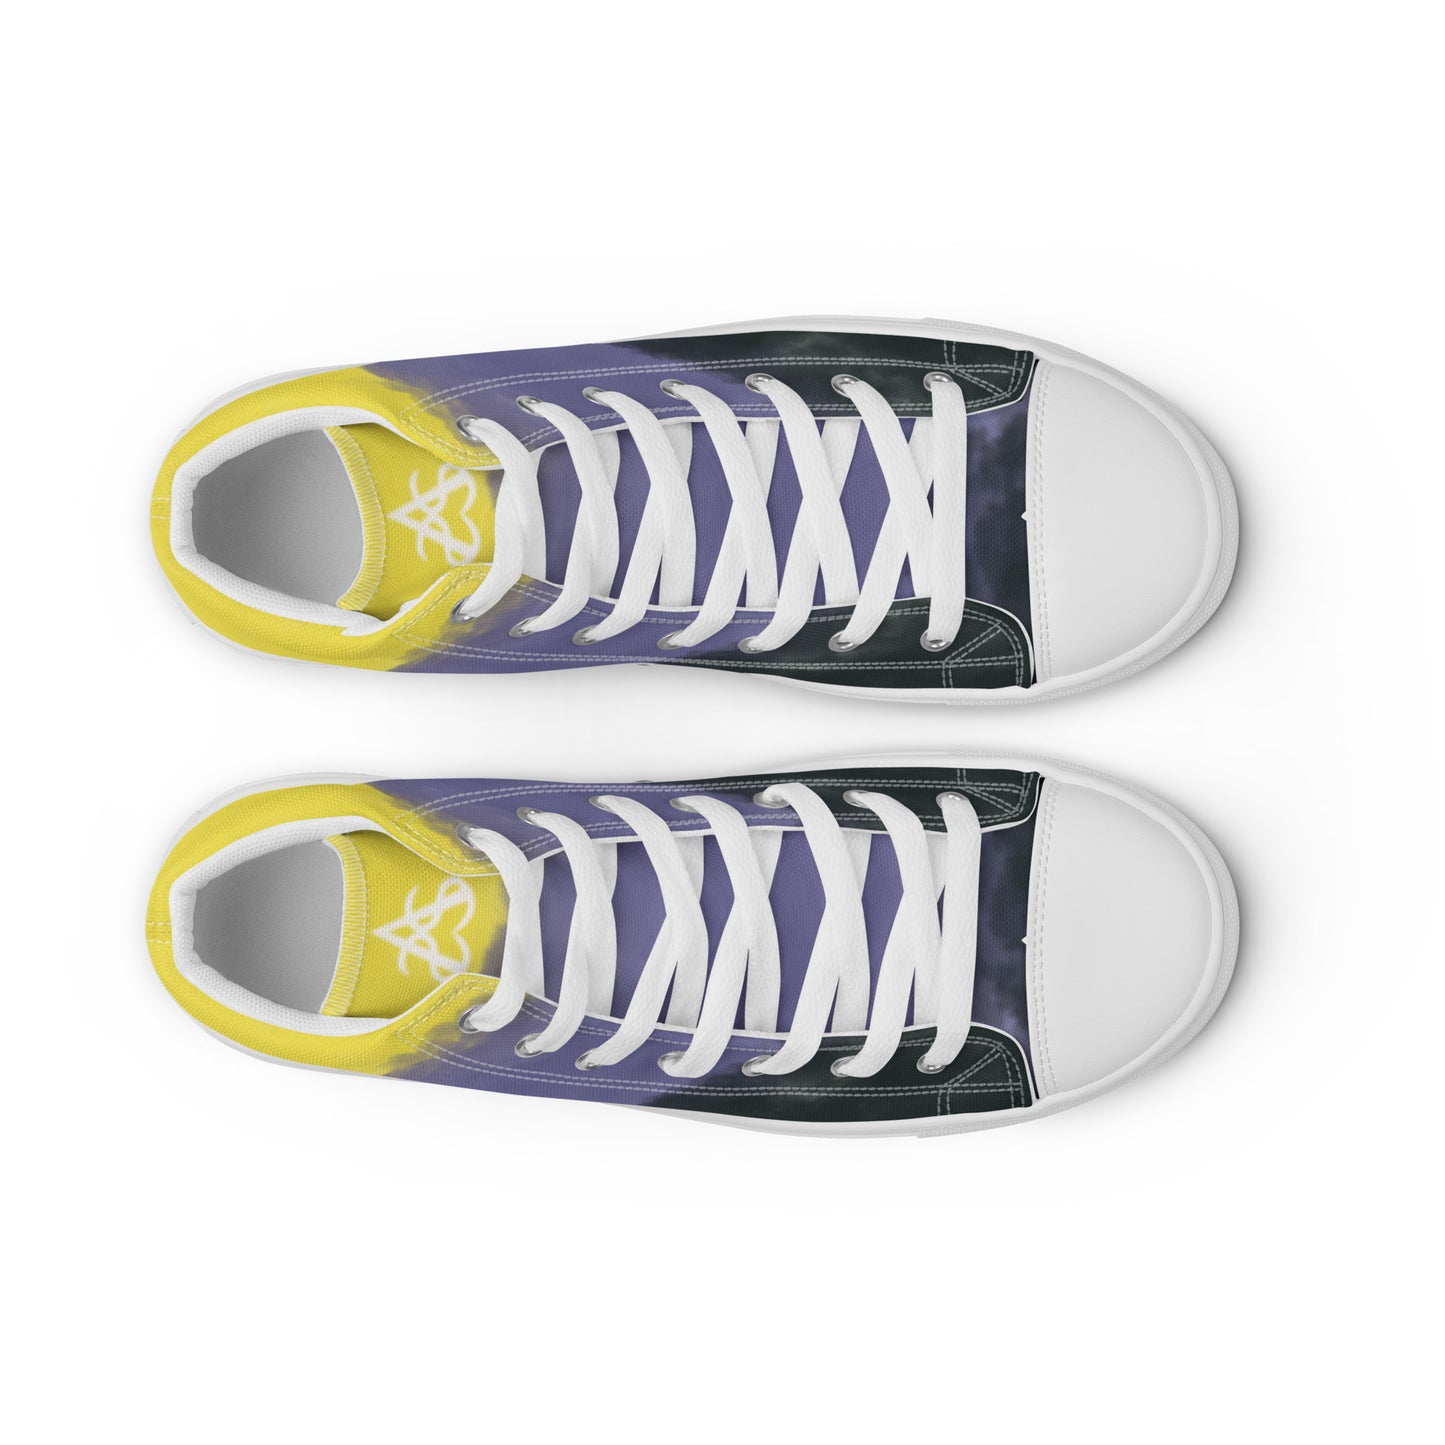 Top view: a pair of high-top canvas shoes with cloudy color blocks of the yellow, purple, and black non-binary flag colors with white laces and accents, a white heart on the heel, and white Aras Sivad Studio logo on the tongue.